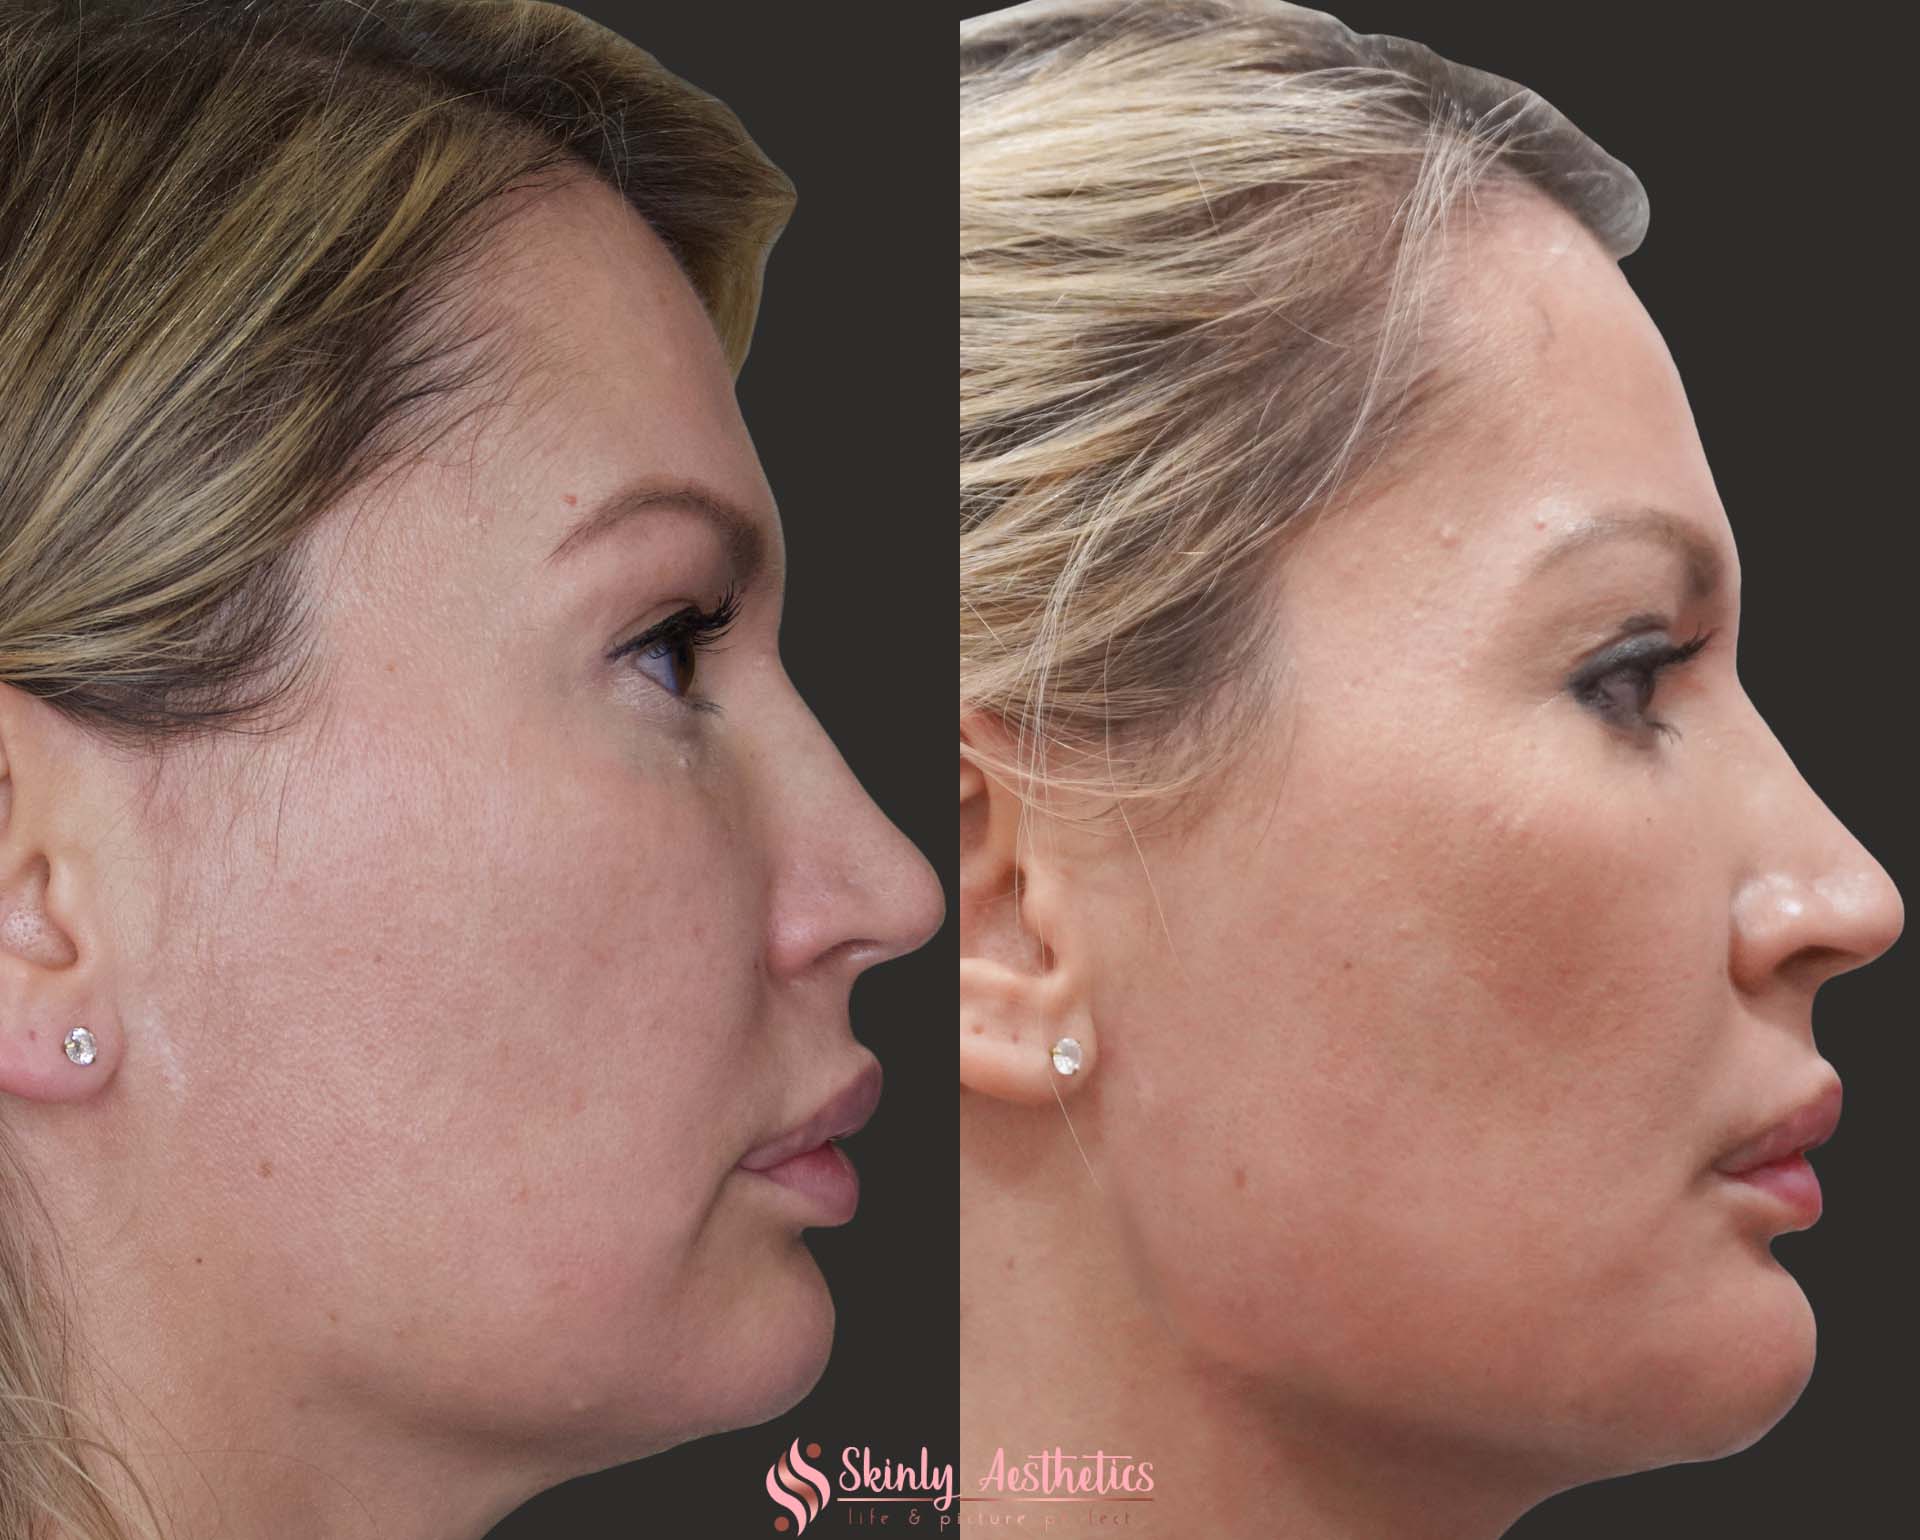 Before and after results following jawline sculpting with Radiesse filler